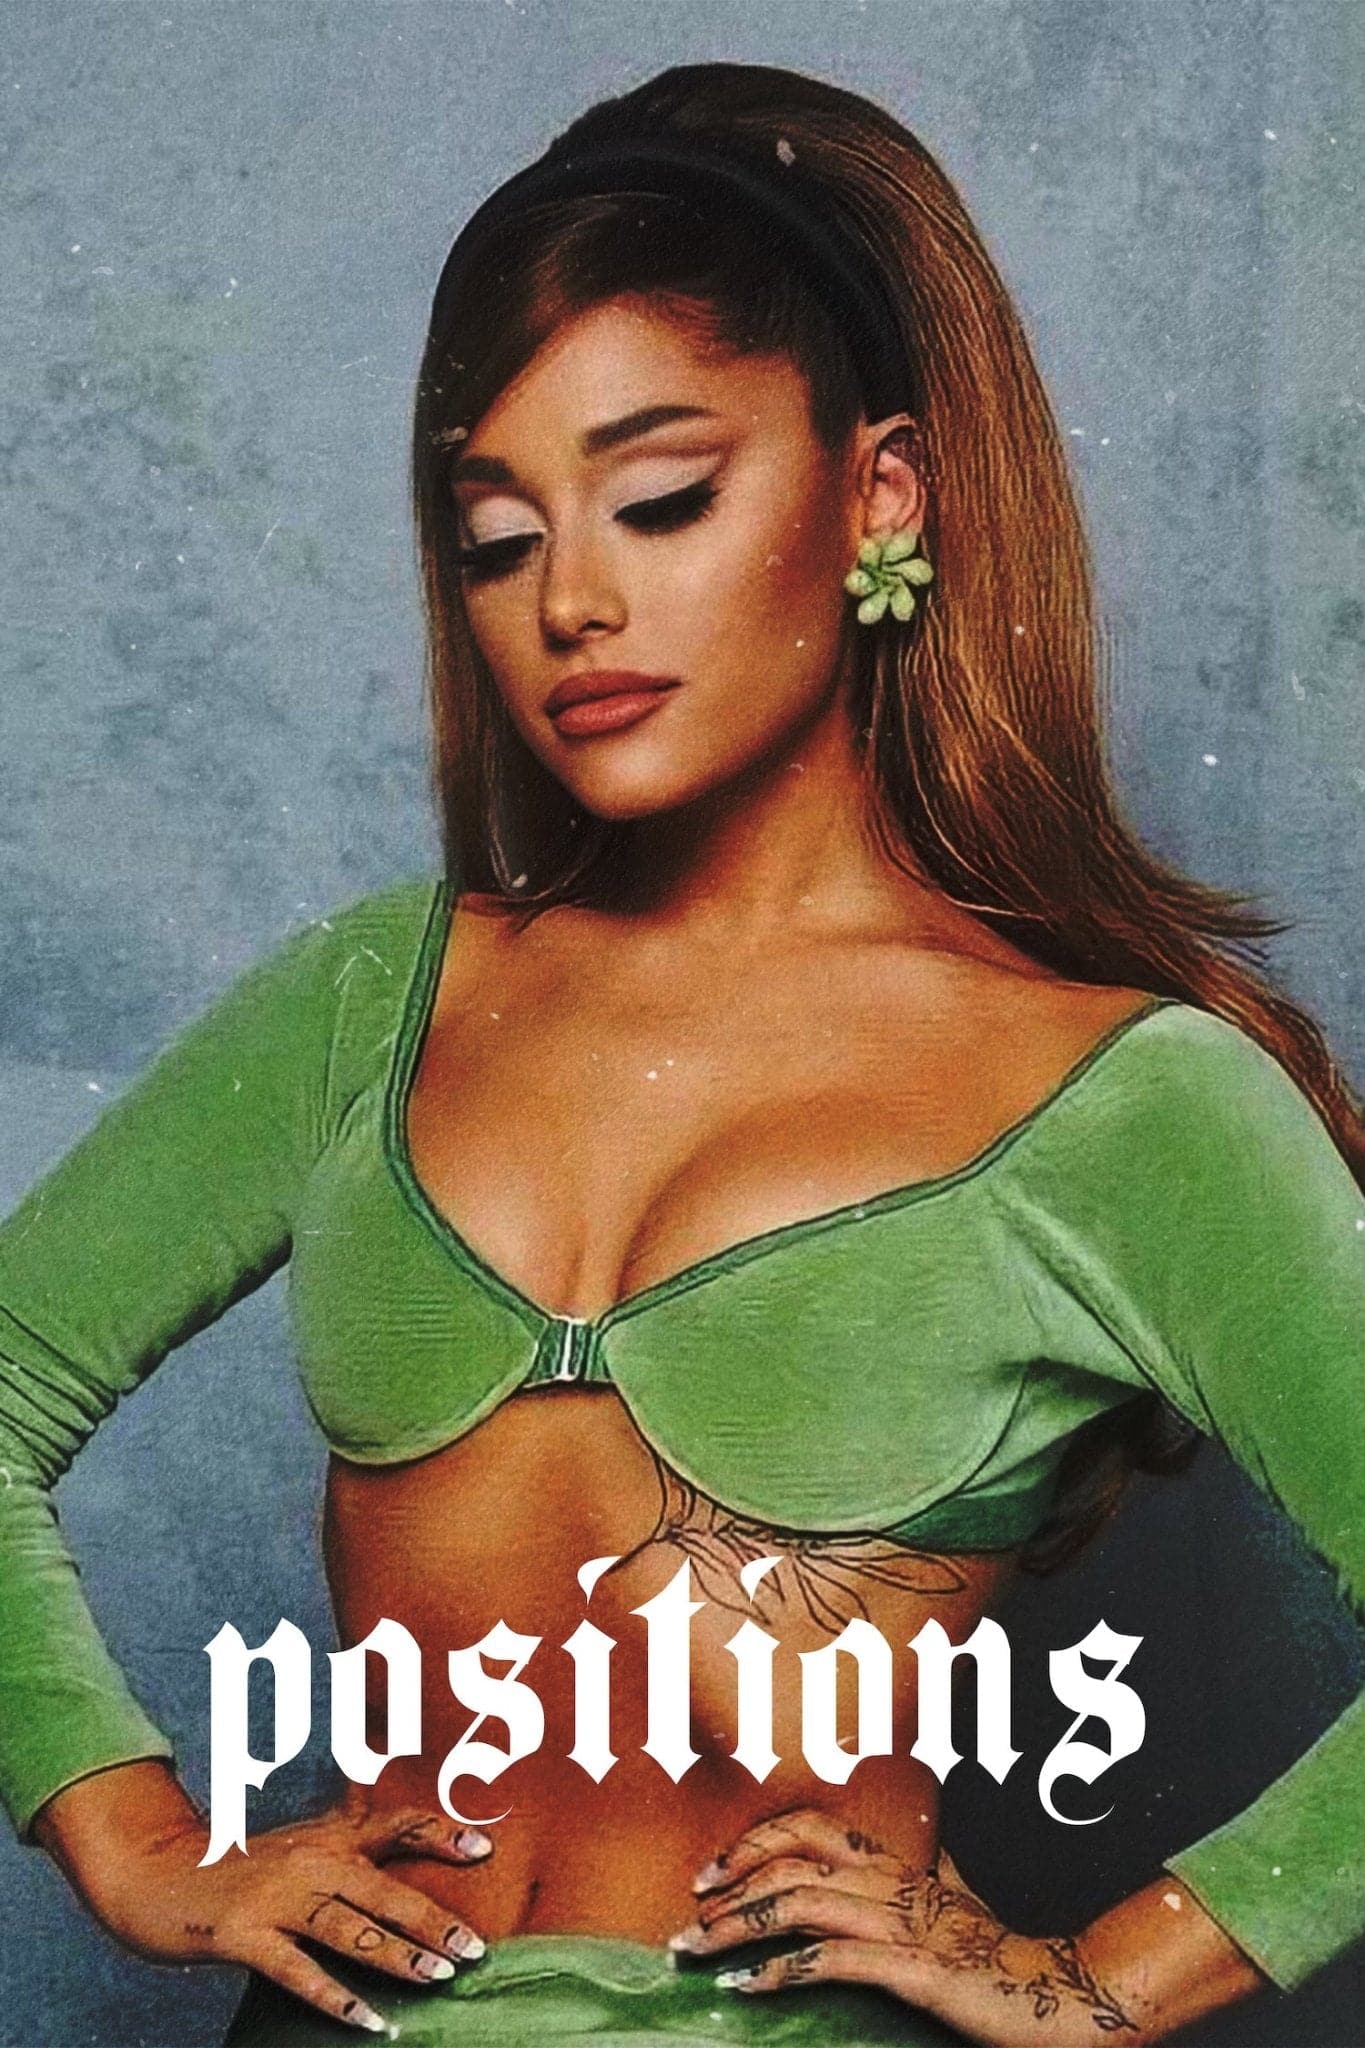 Ariana Grande 'Positions' Poster - Posters Plug